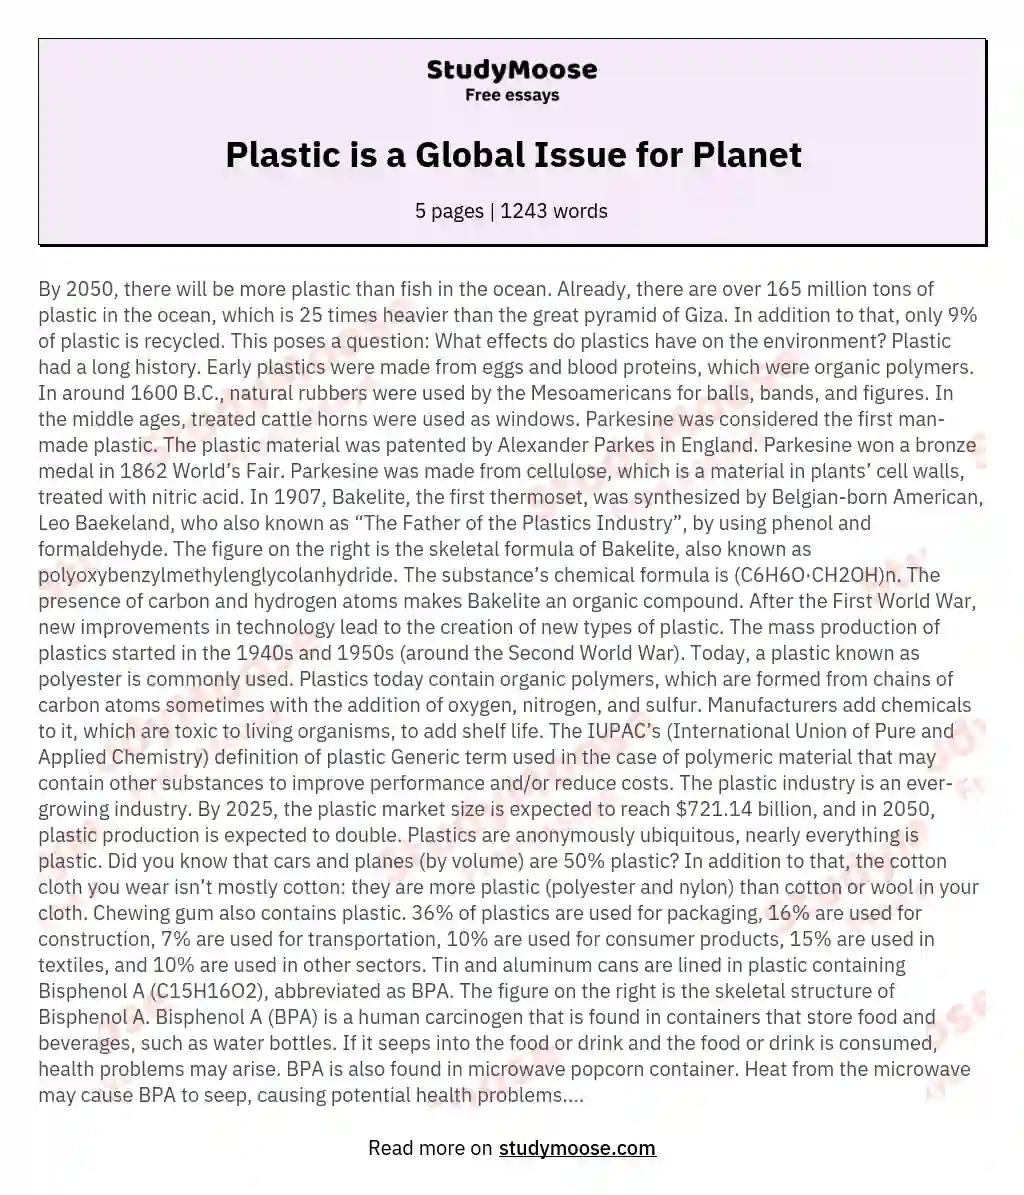 Plastic is a Global Issue for Planet